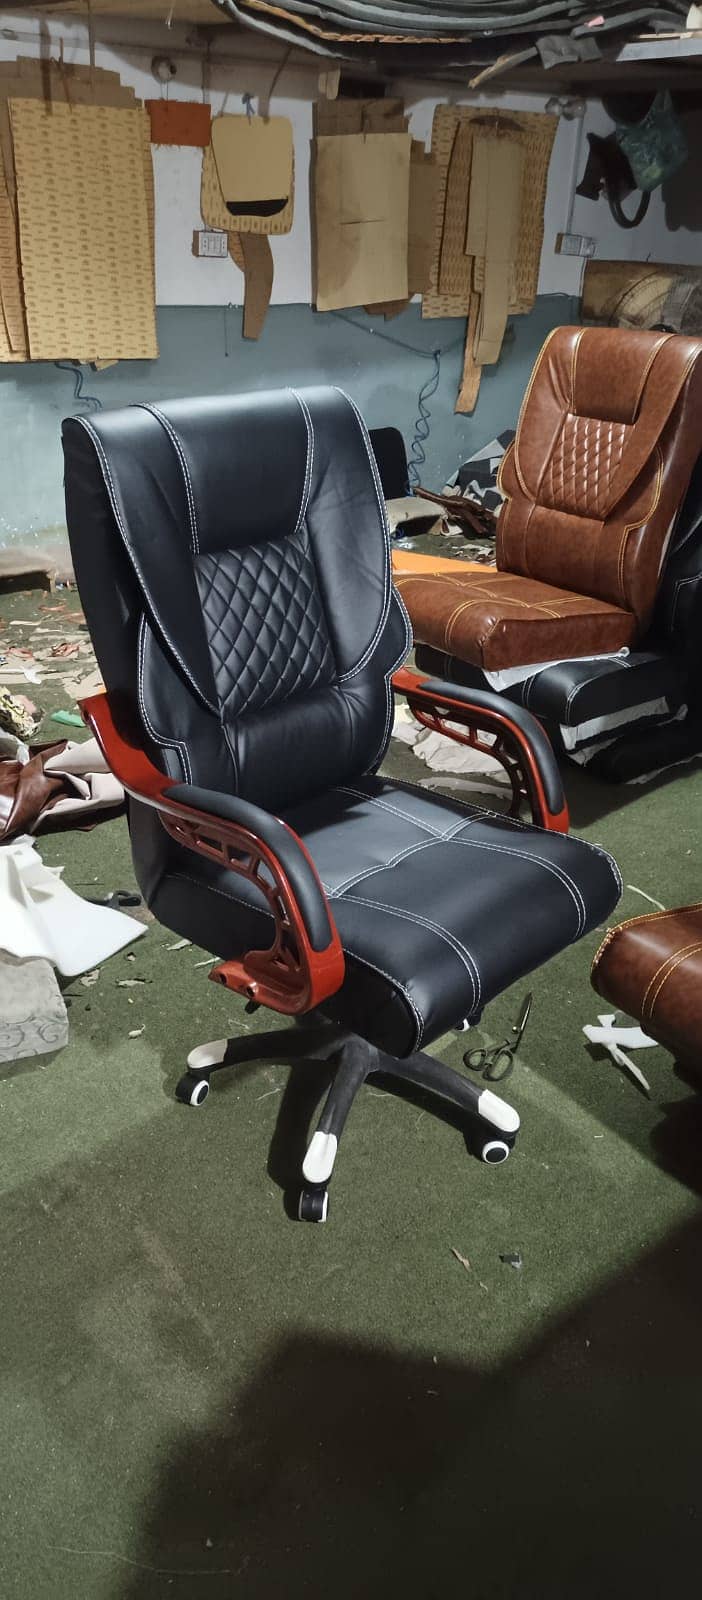 Office chair | Boss chair | revoving chair for sale | executive chair 6